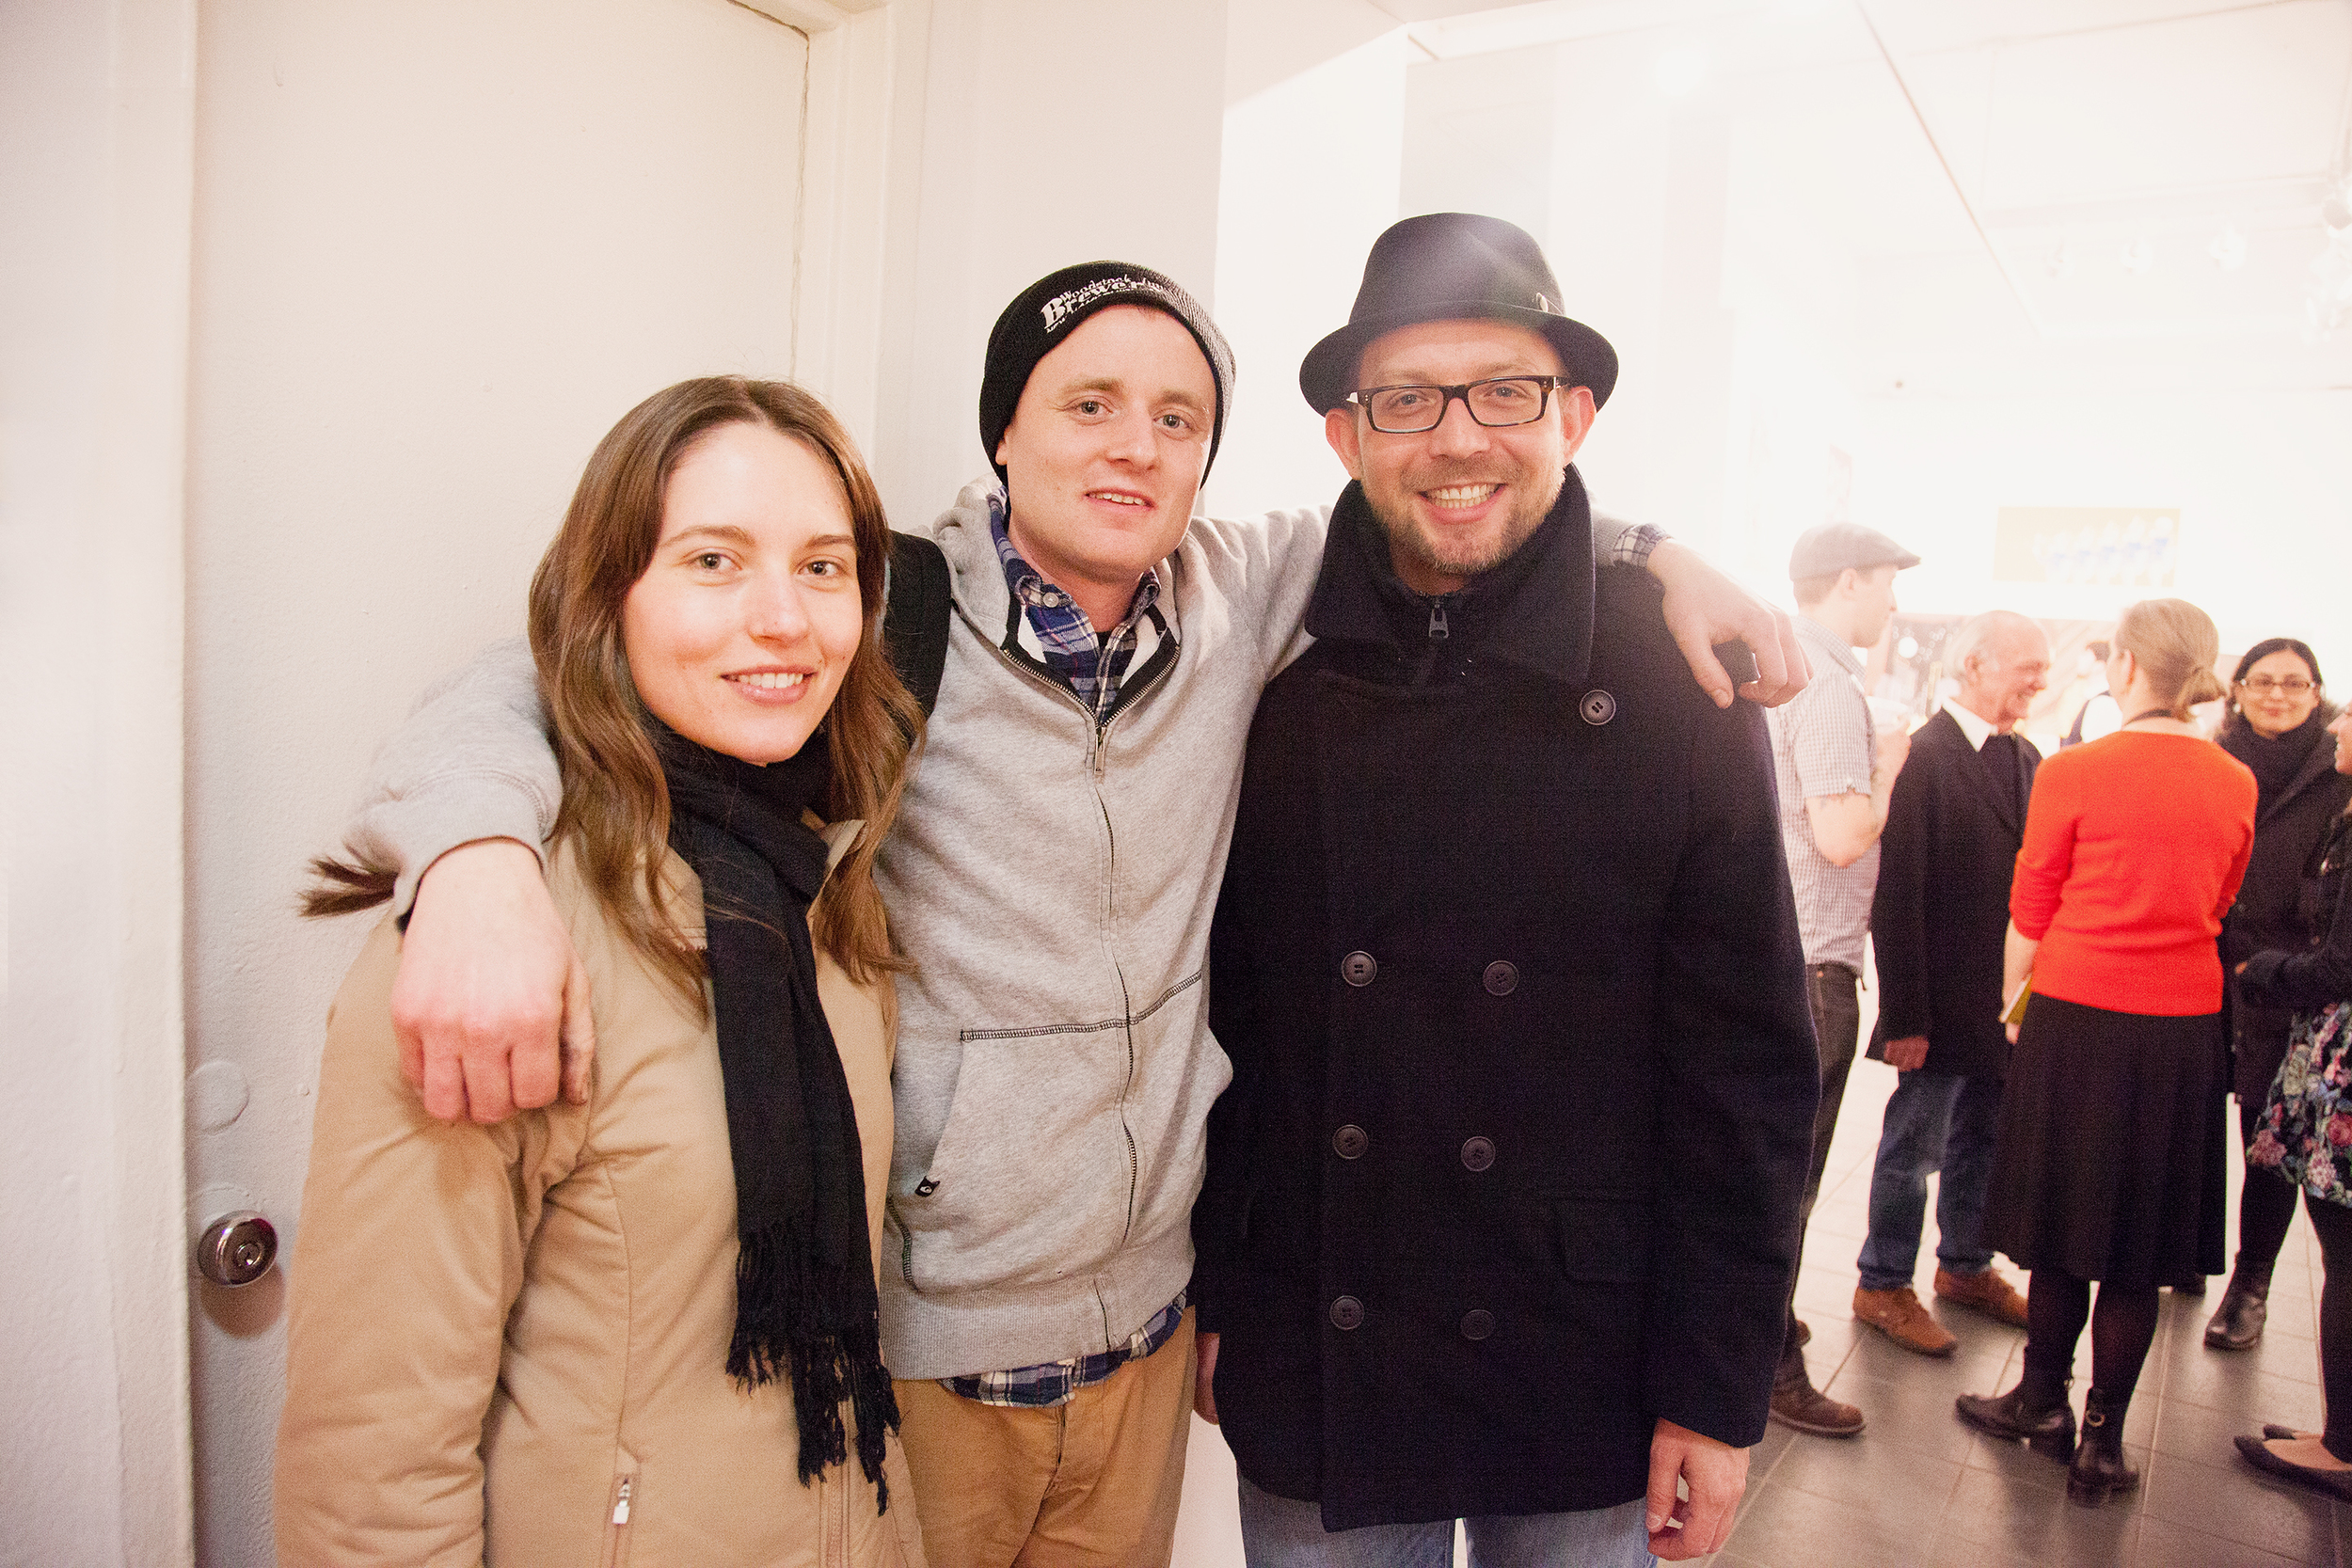  Opening Reception for "The Broadway Project" MFA Illustration Group Show School of Visual Arts, NYC, 2013 